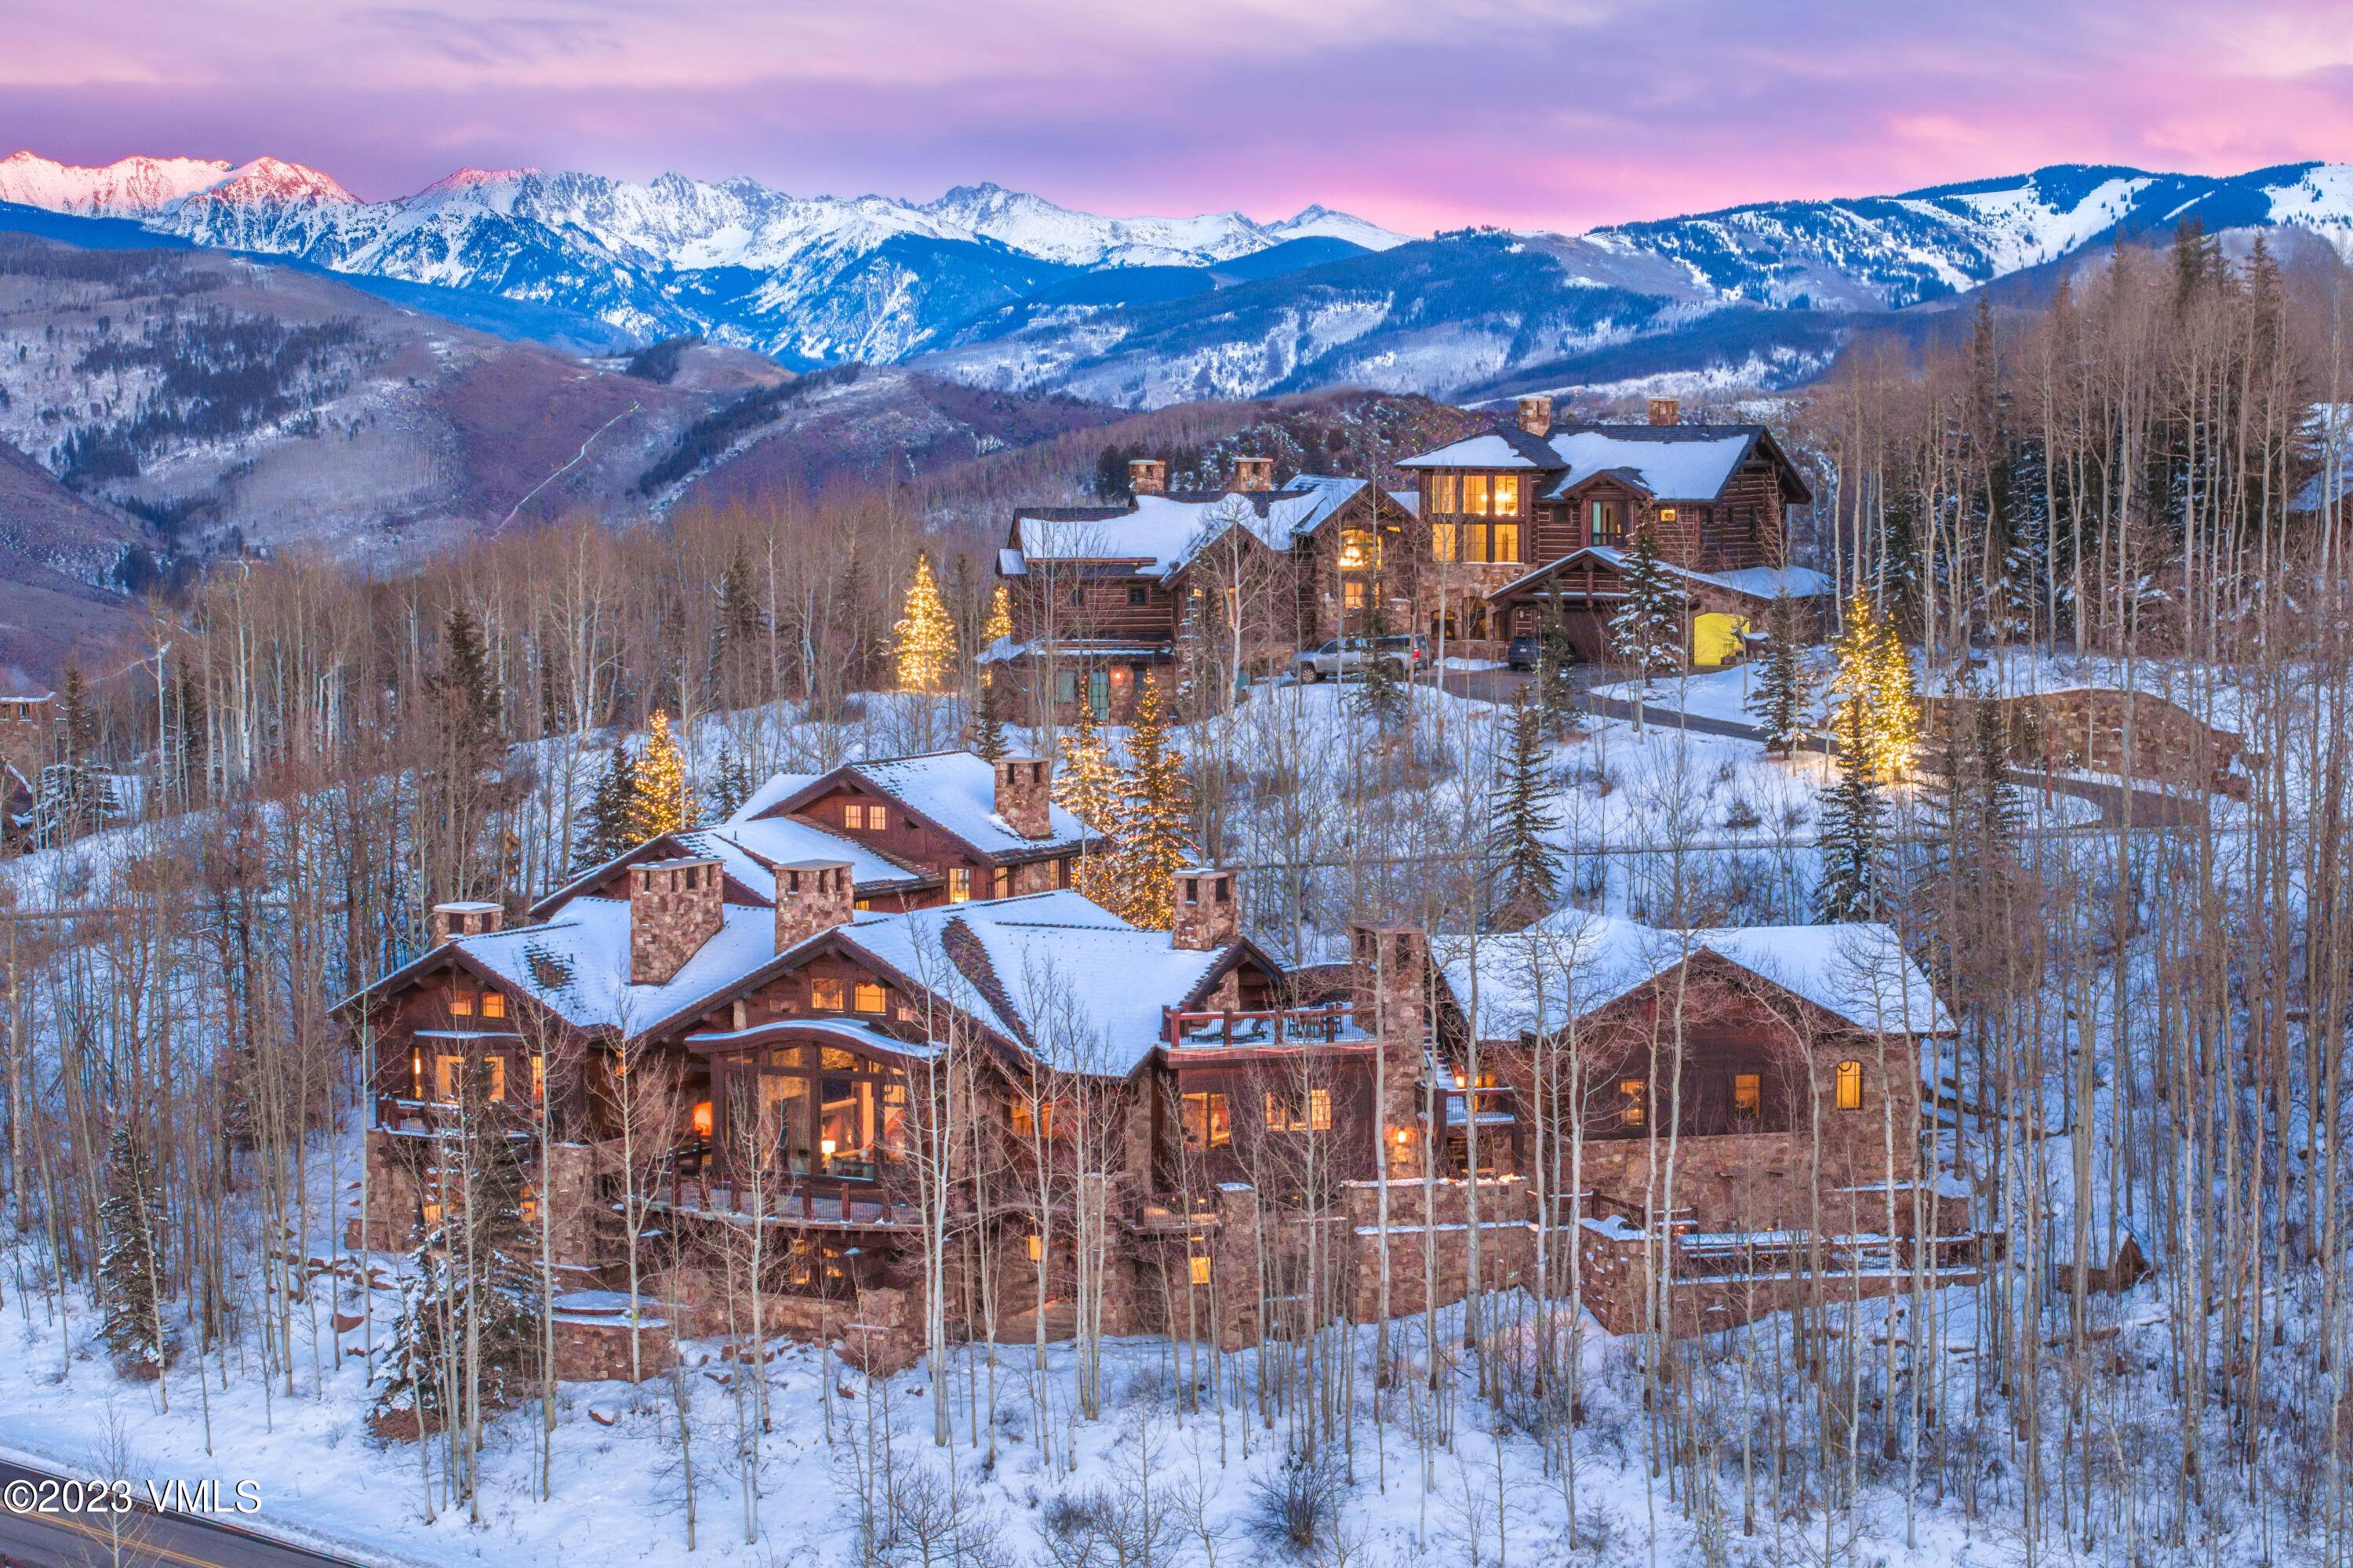 On the defining ridge between Beaver Creek and Bachelor Gulch, this palatial estate features stunning western views, authentic refinements, and ski accessibility via meandering homeowner ski ways.